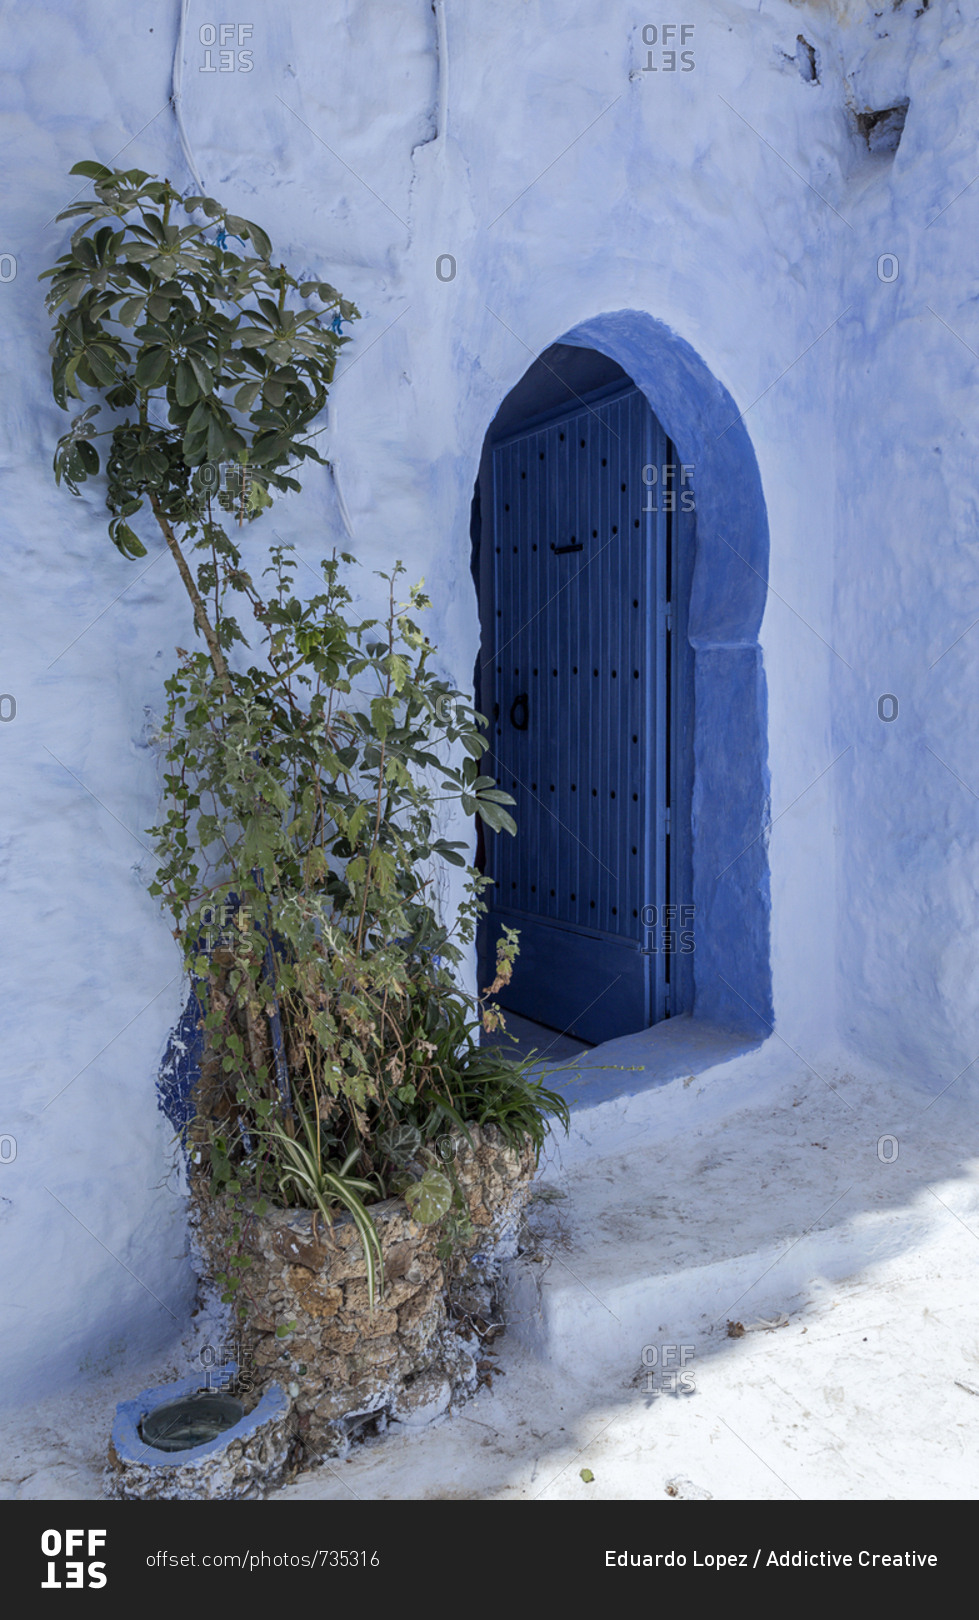 Chaouen the blue city of Morocco, streets, doors, windows,
details stock photo - OFFSET